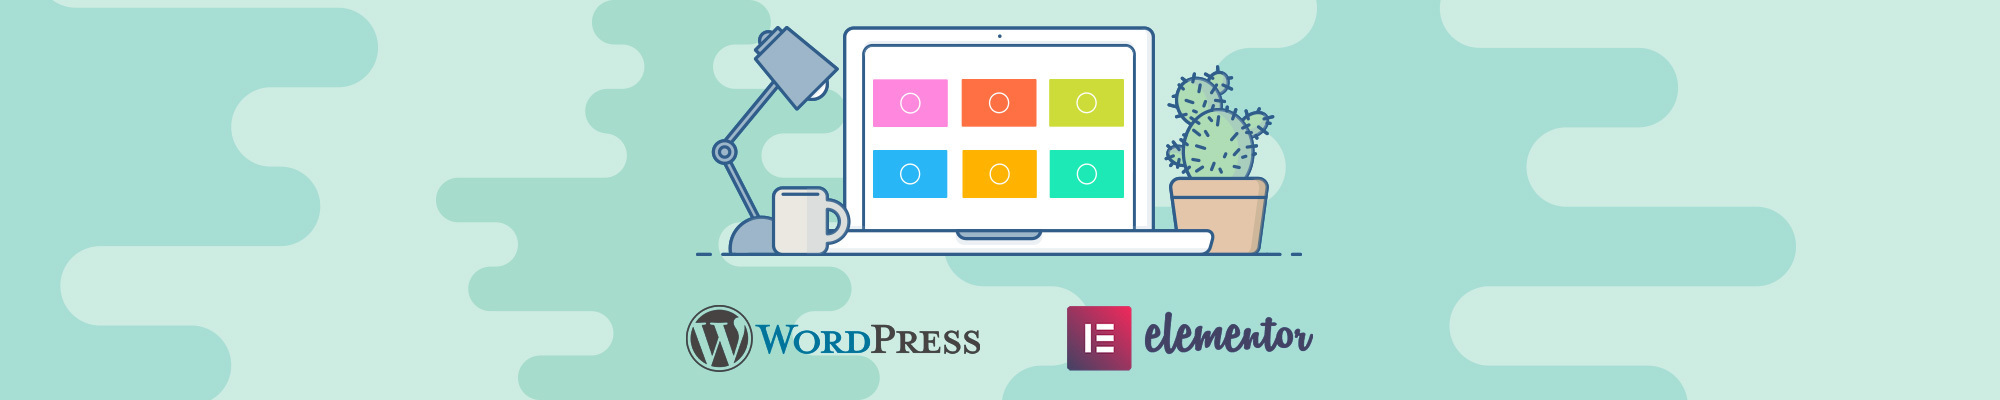 WordPress Themes / Templates with Elementor Pro for websites and WebSops